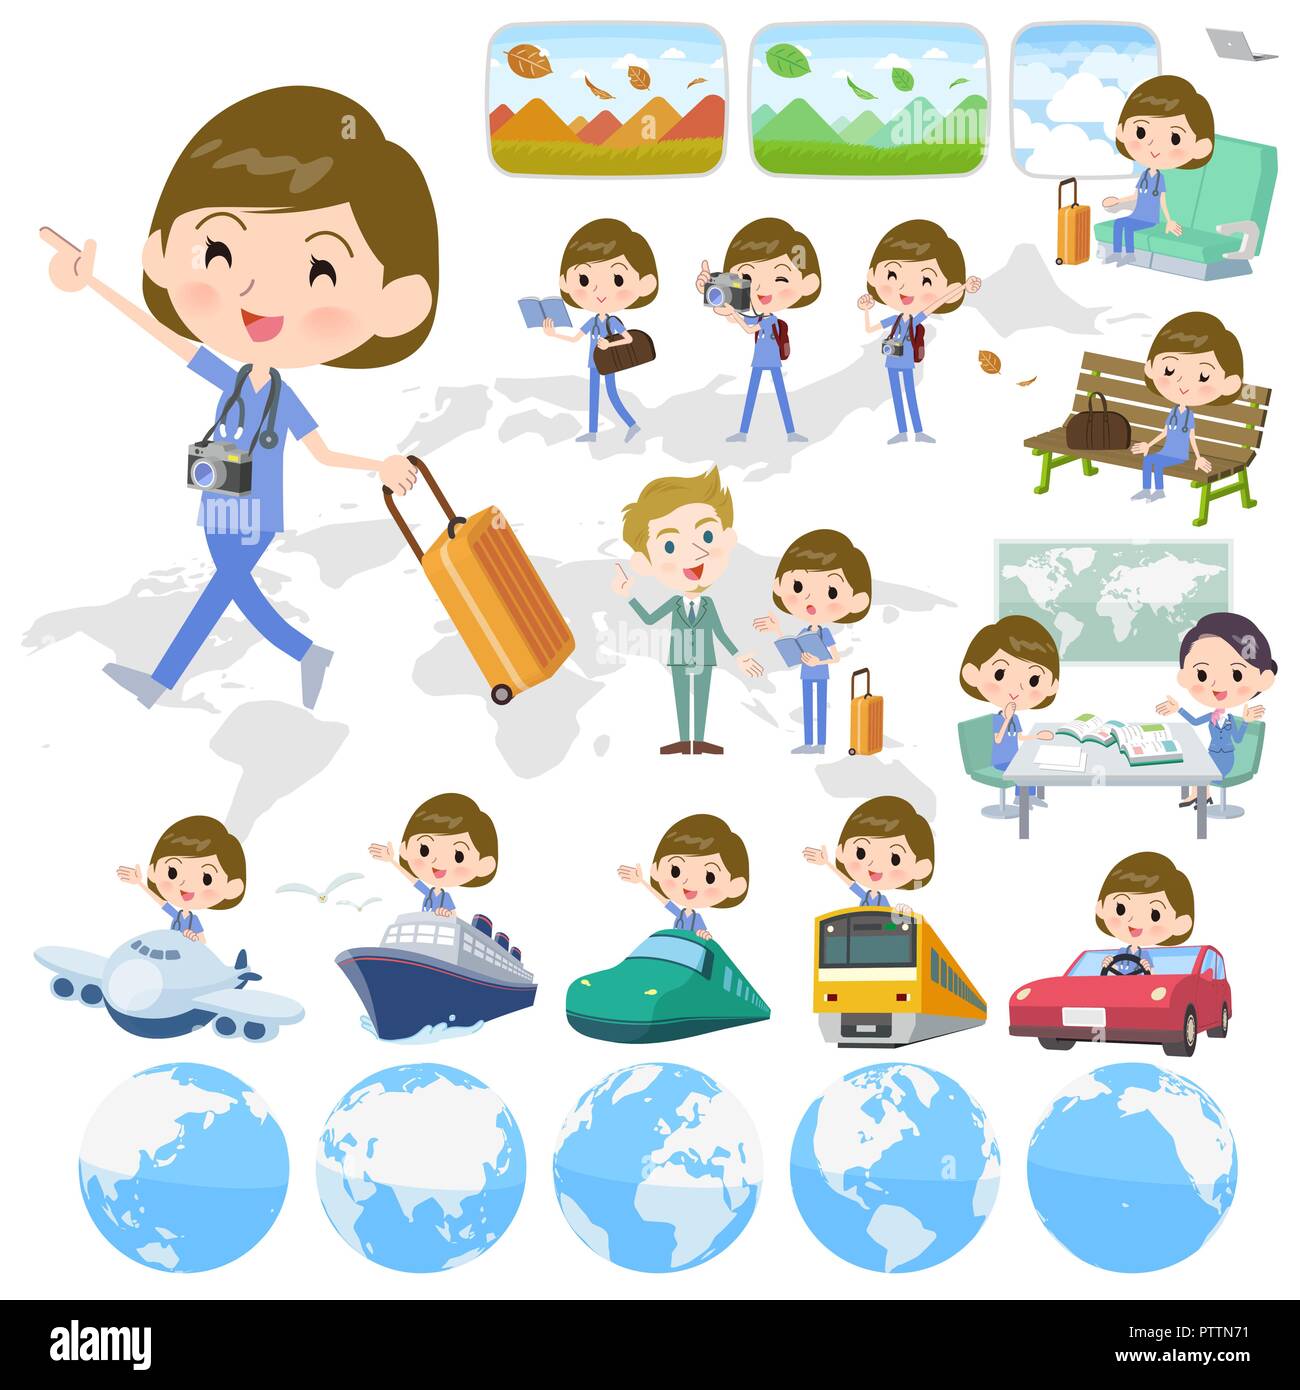 A set of Surgical Doctor women on travel.There are also vehicles such as boats and airplanes.It's vector art so it's easy to edit. Stock Vector